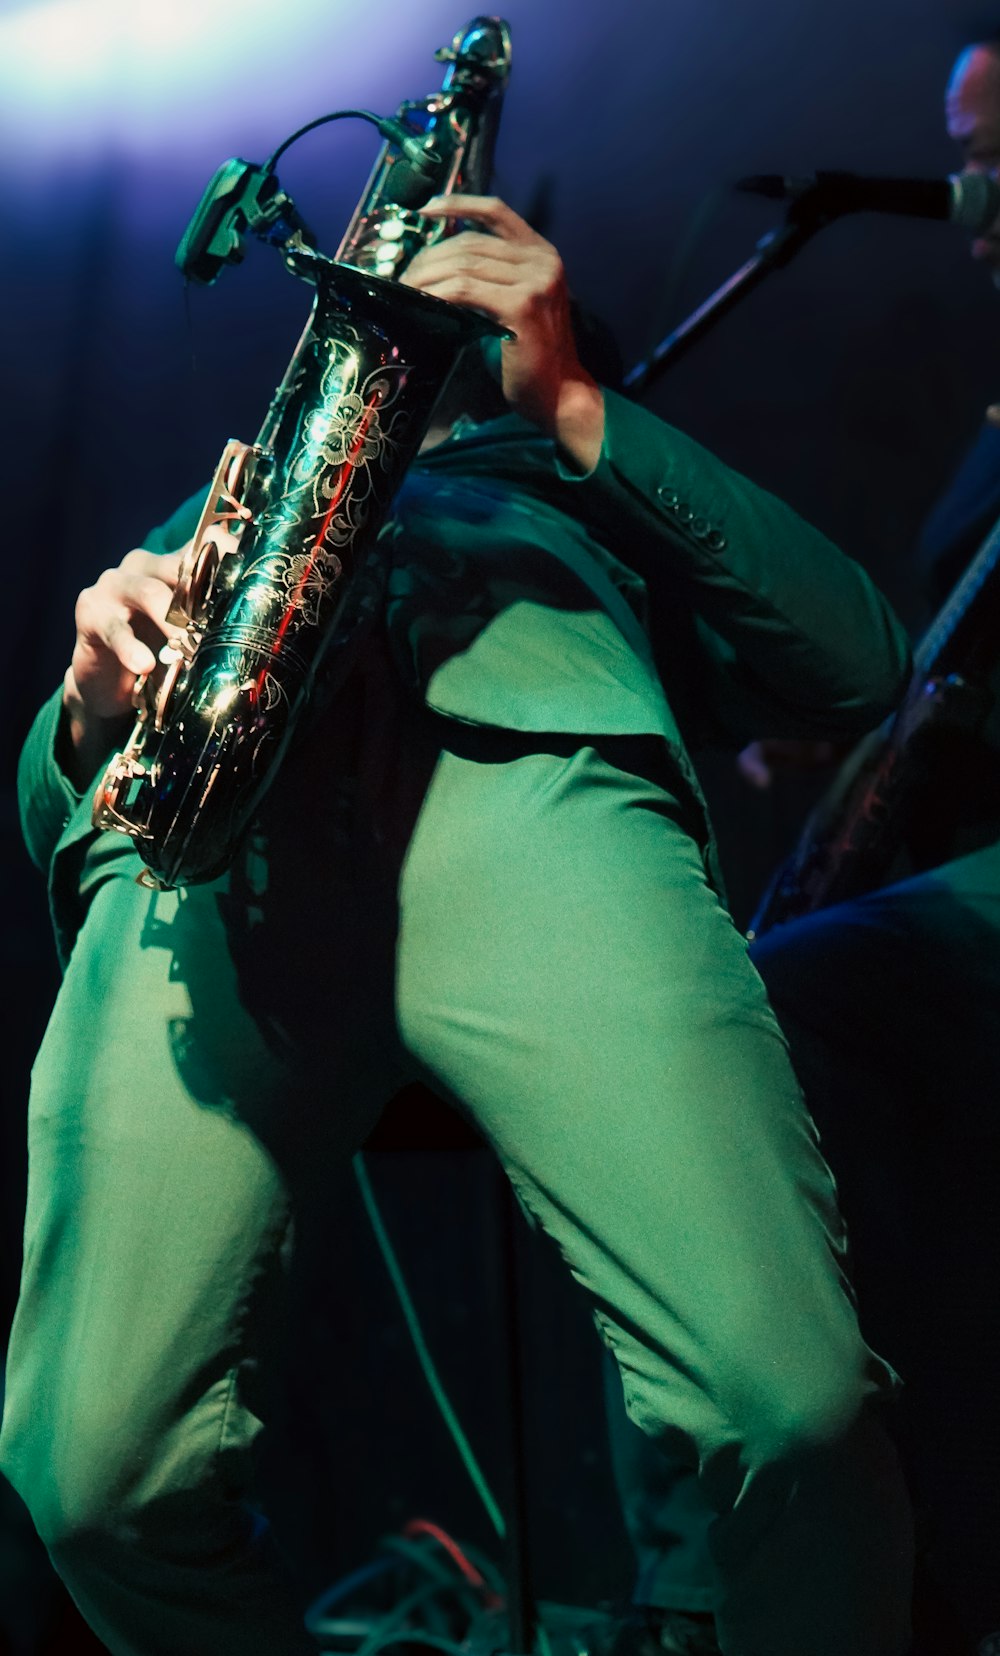 a man playing a saxophone on a stage